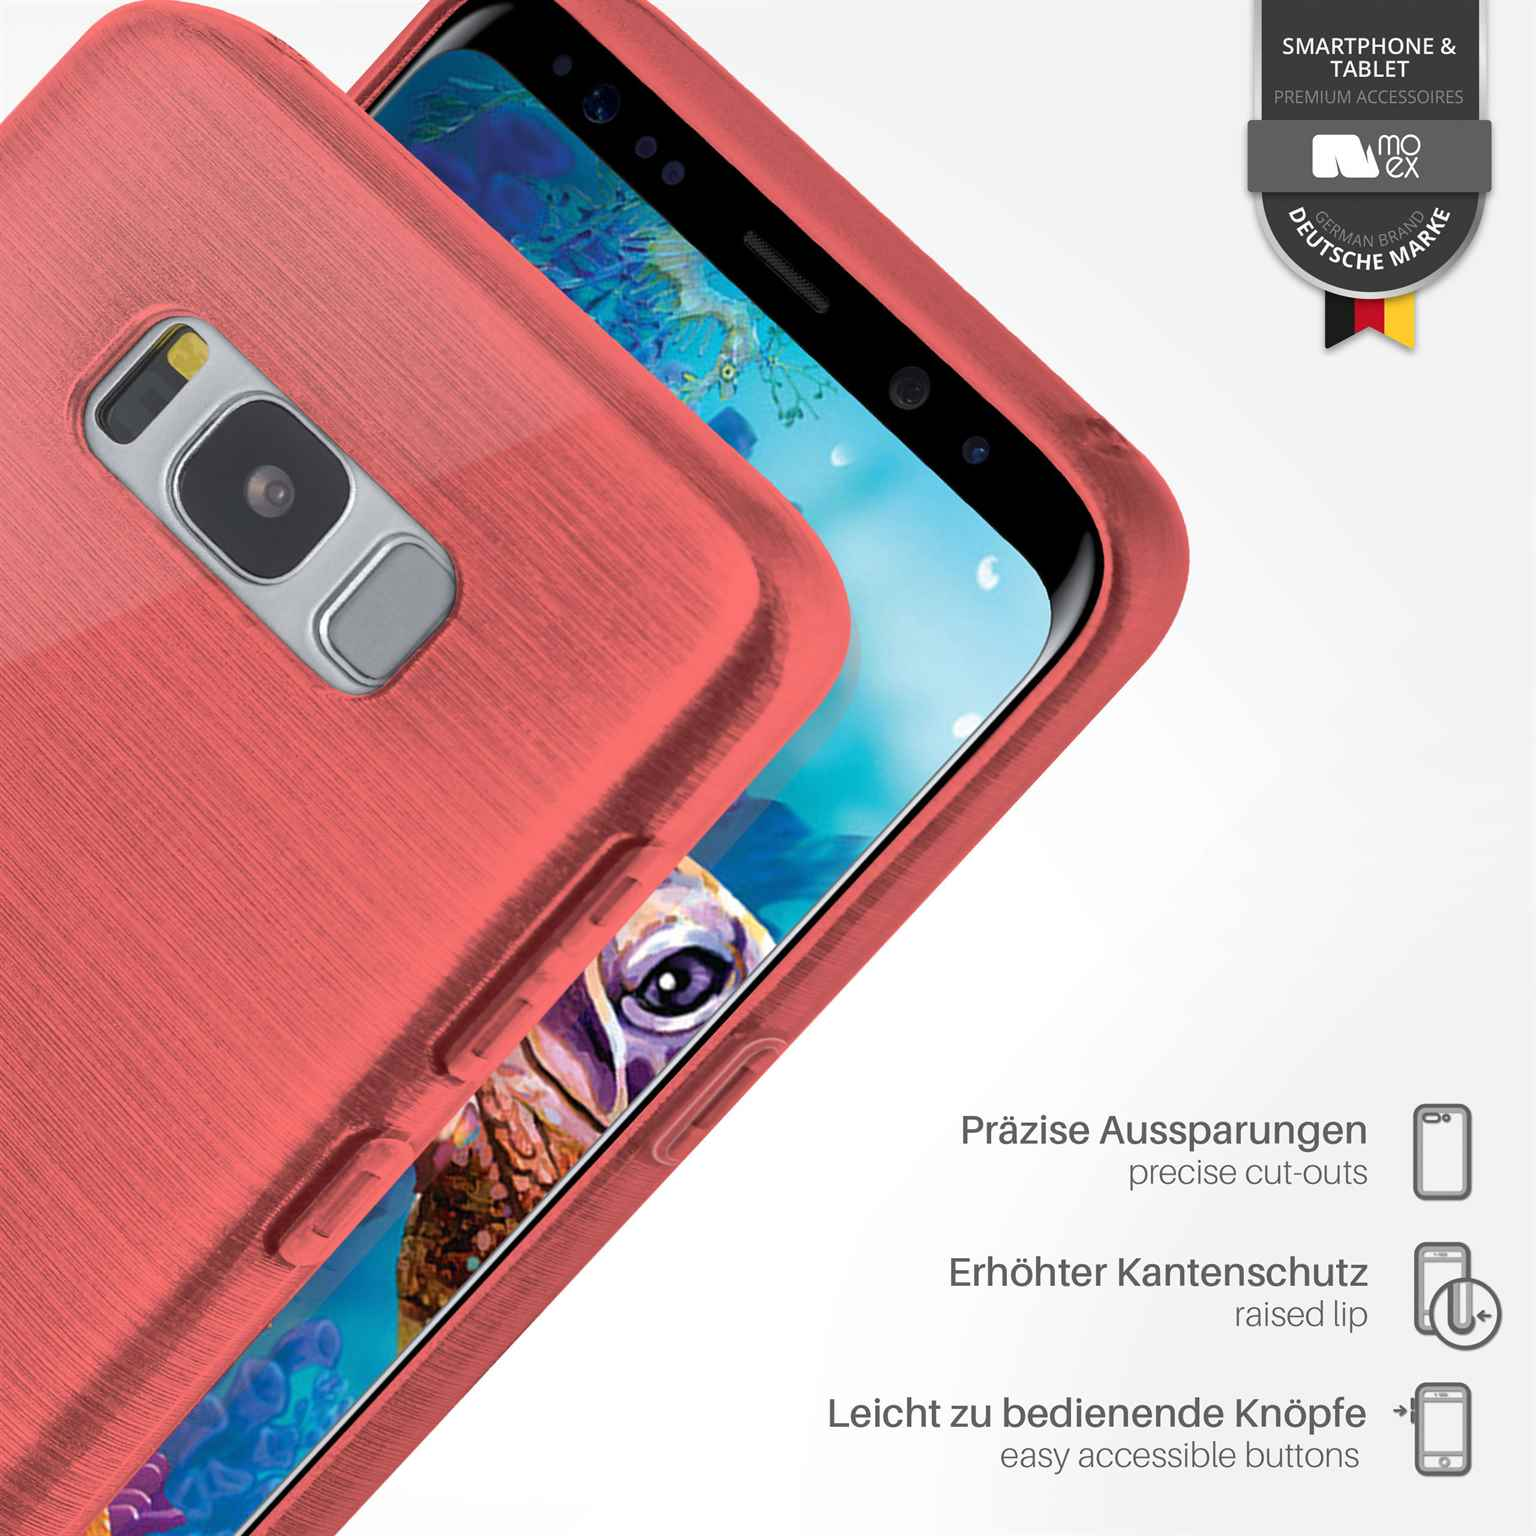 MOEX Case, S8, Brushed Backcover, Galaxy Samsung, Coral-Red